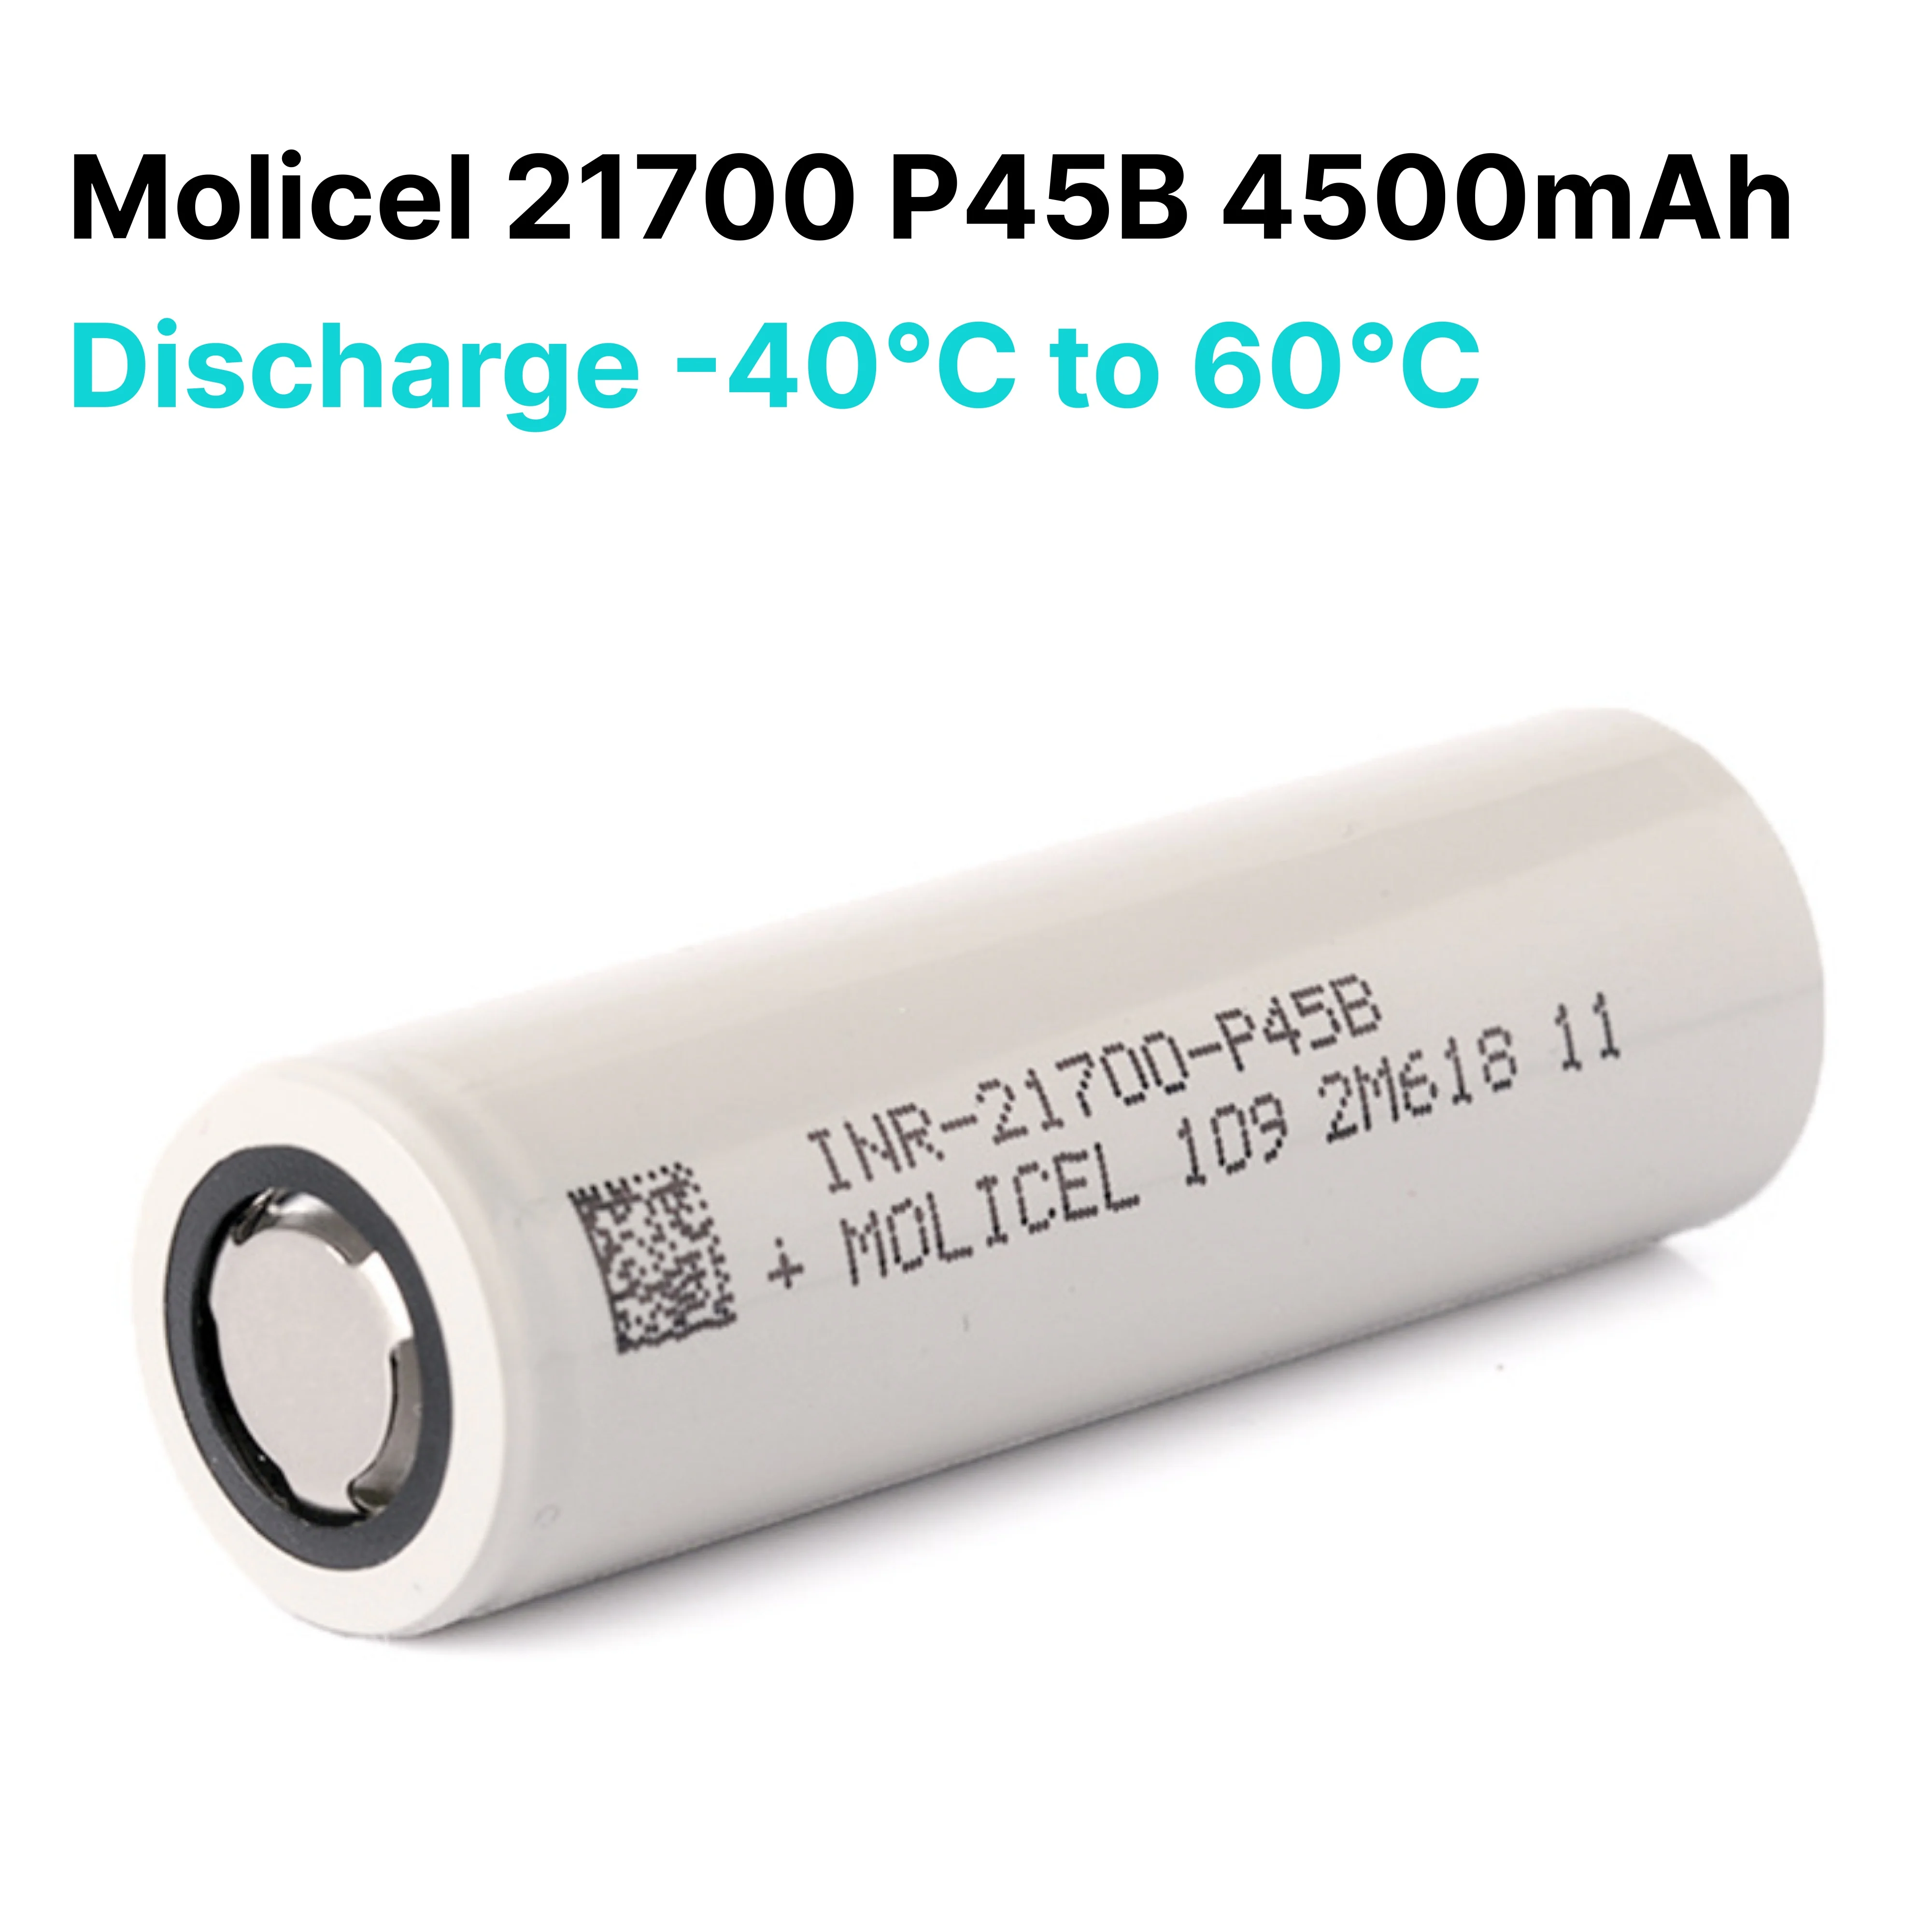 Authentic Molicel Lithium ion batteries 18650 Battery 21700 Battery P45B  4500mah 4.5Ah Max discharge rate 45A factory